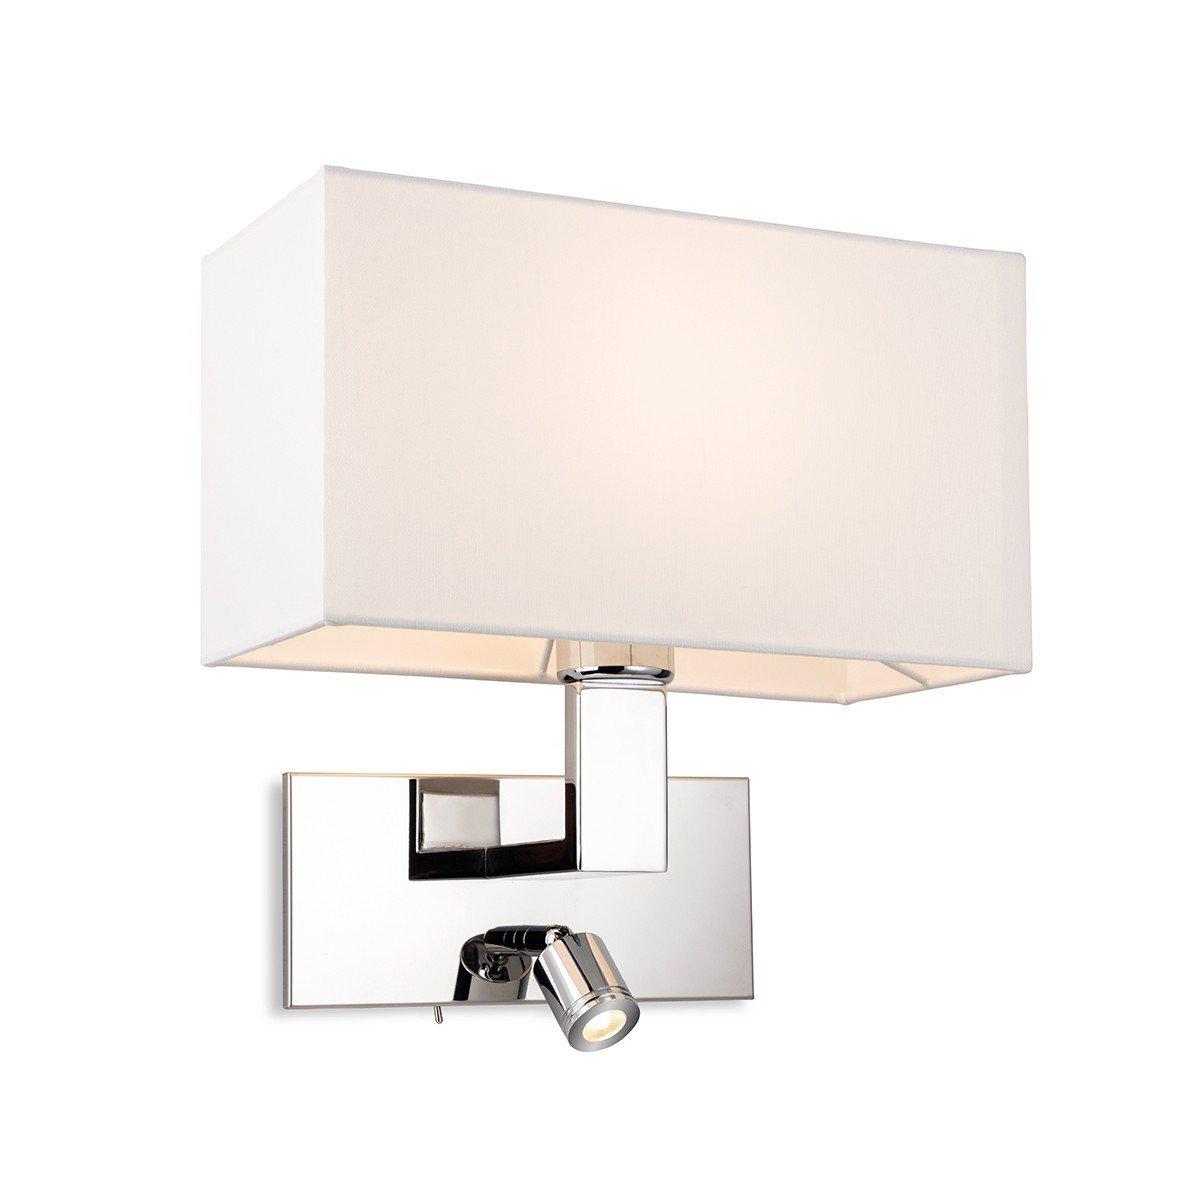 Raffles Wall Lamp with Adjustable Switched Reading Light Chrome with Cream Shade